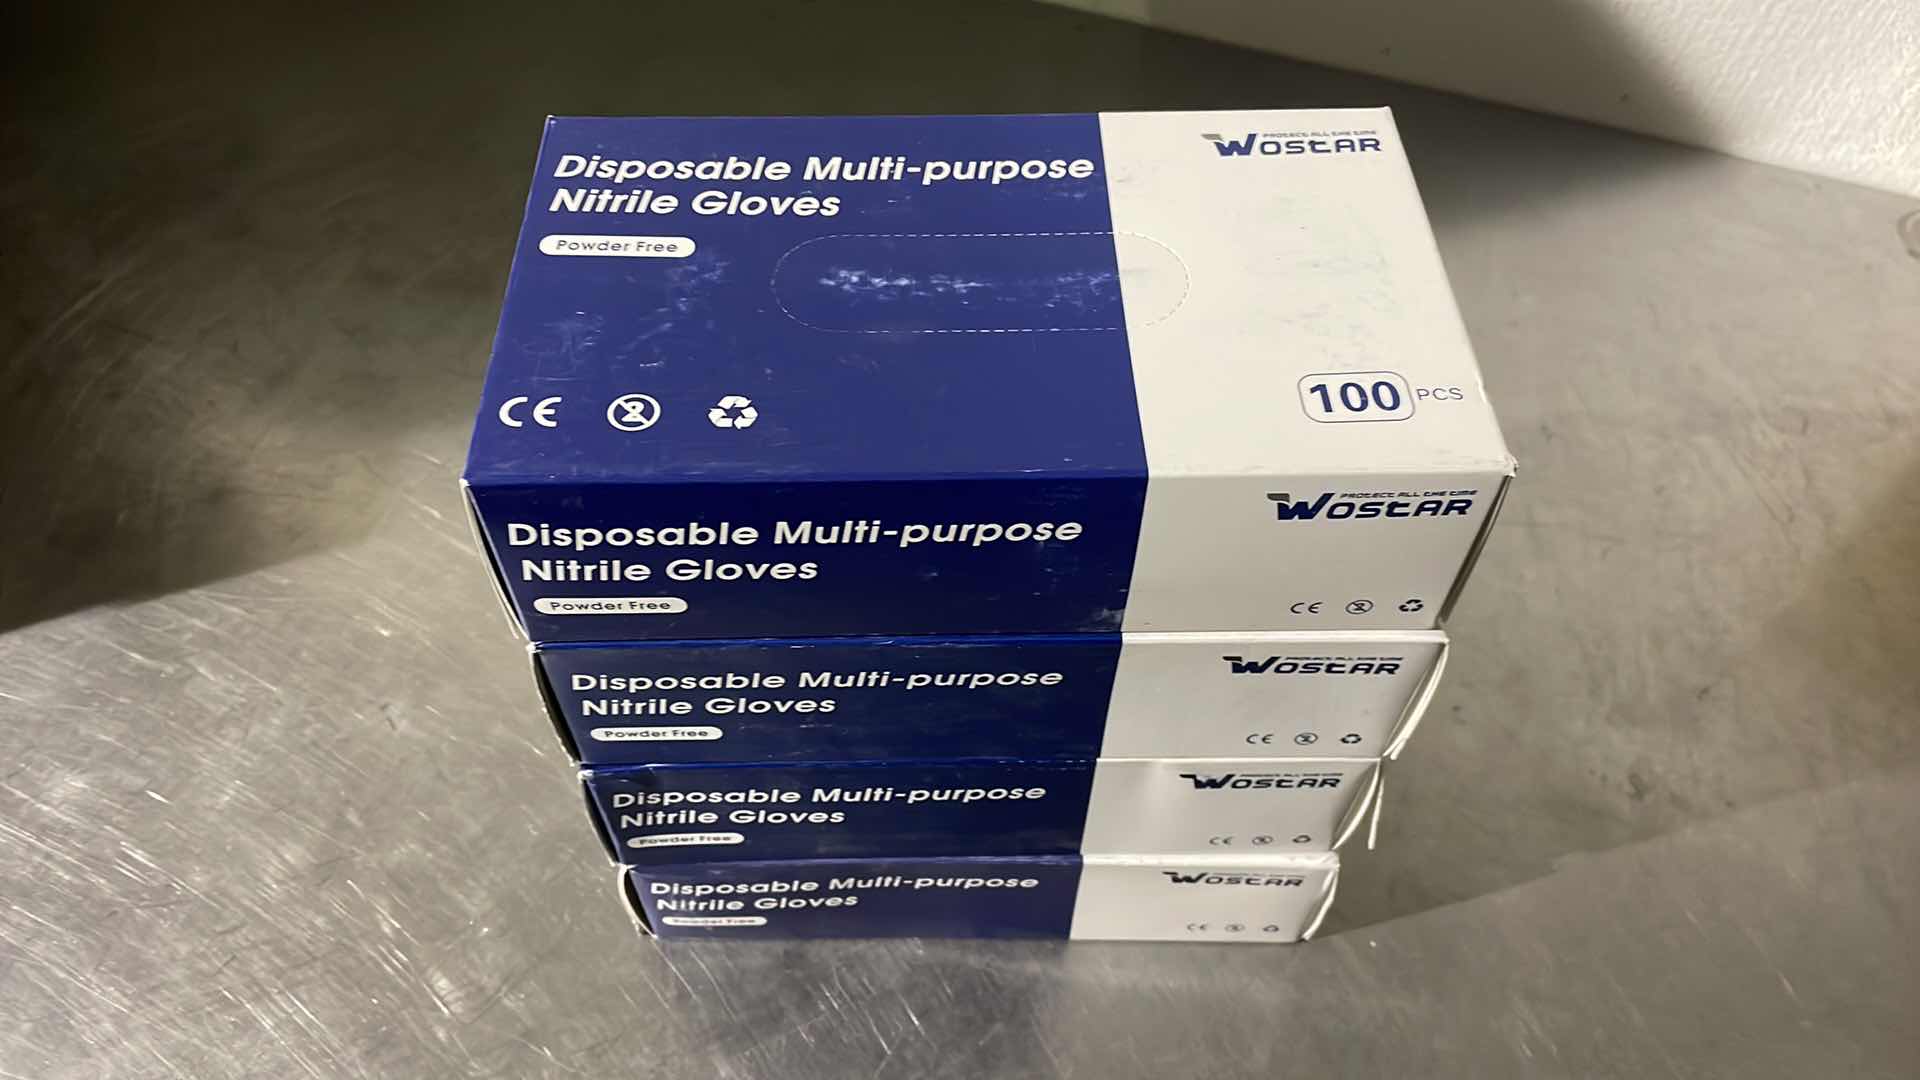 Photo 1 of WOSTAR NITRILE DISPOSABLE GLOVES 4 MIL POWDER LATEX FREE DISPOSABLE NON-STERILE NITRILE EXAM GLOVES 3 BOXES SMALL 1 BOX MEDIUM